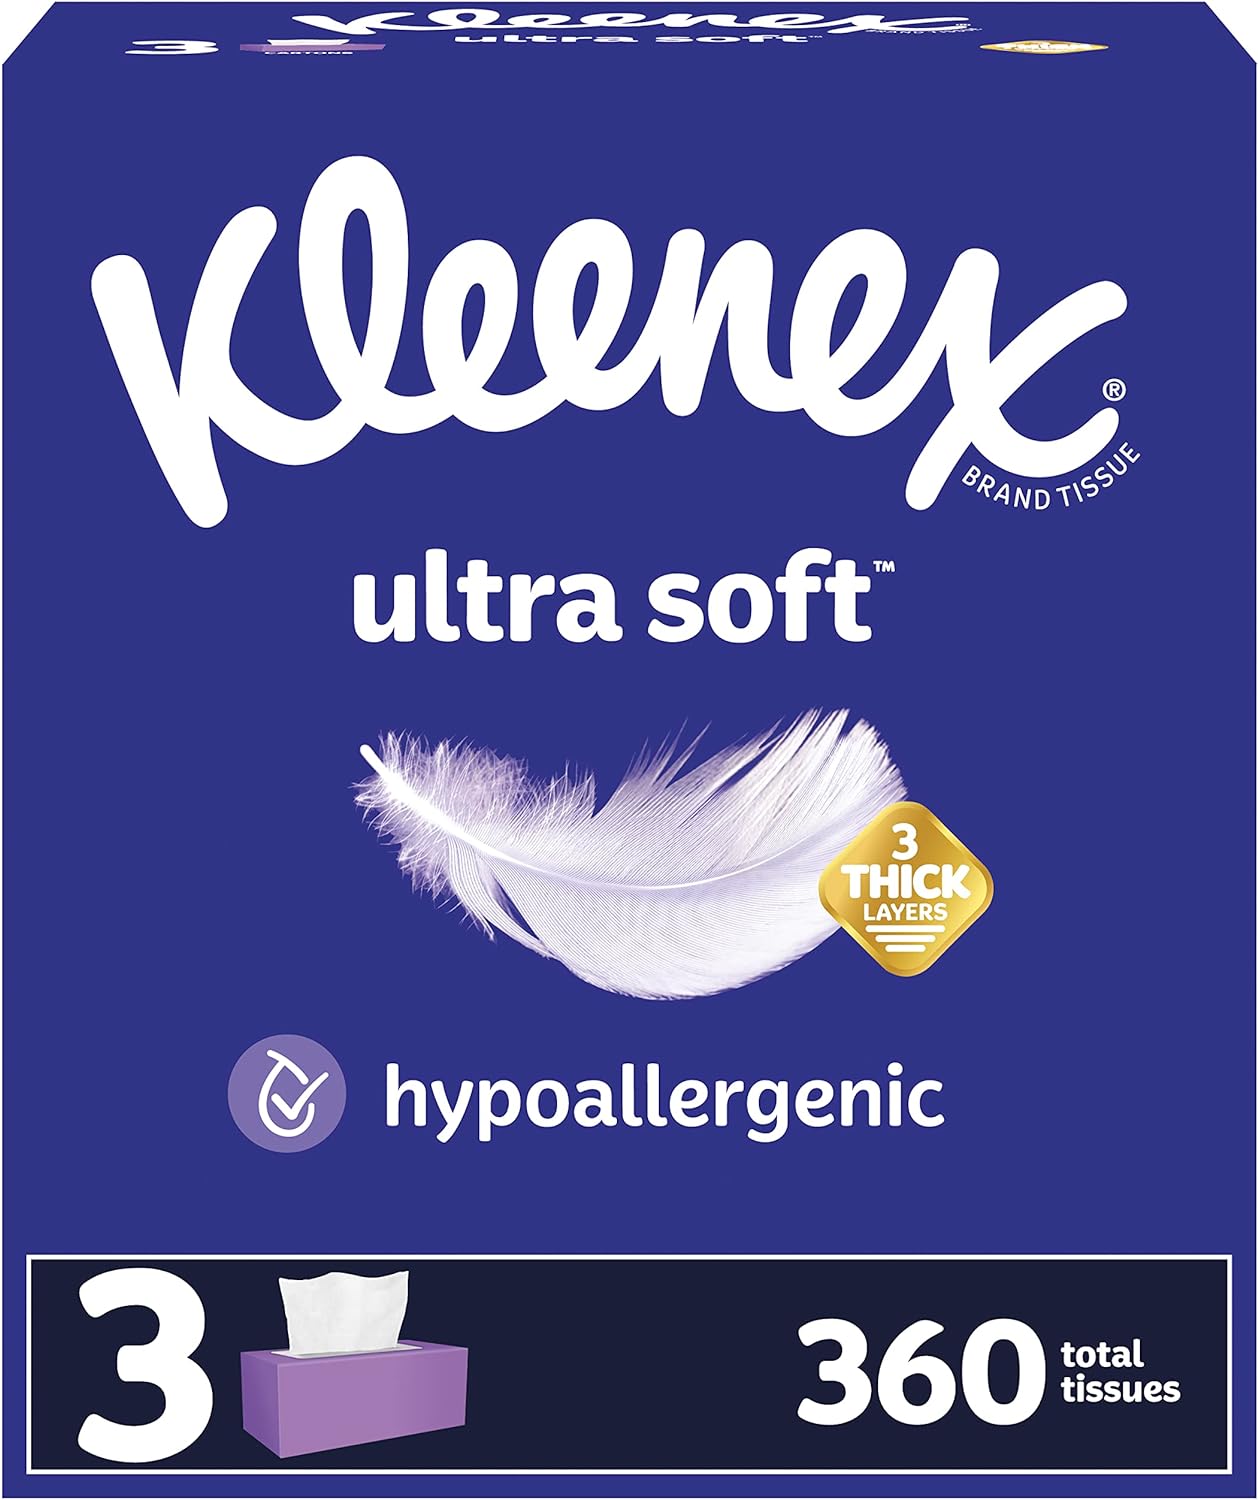 $3.99 w/ S&S: 3-Pack 120-Count Kleenex 3-Layer Facial Tissues (Ultra Soft)